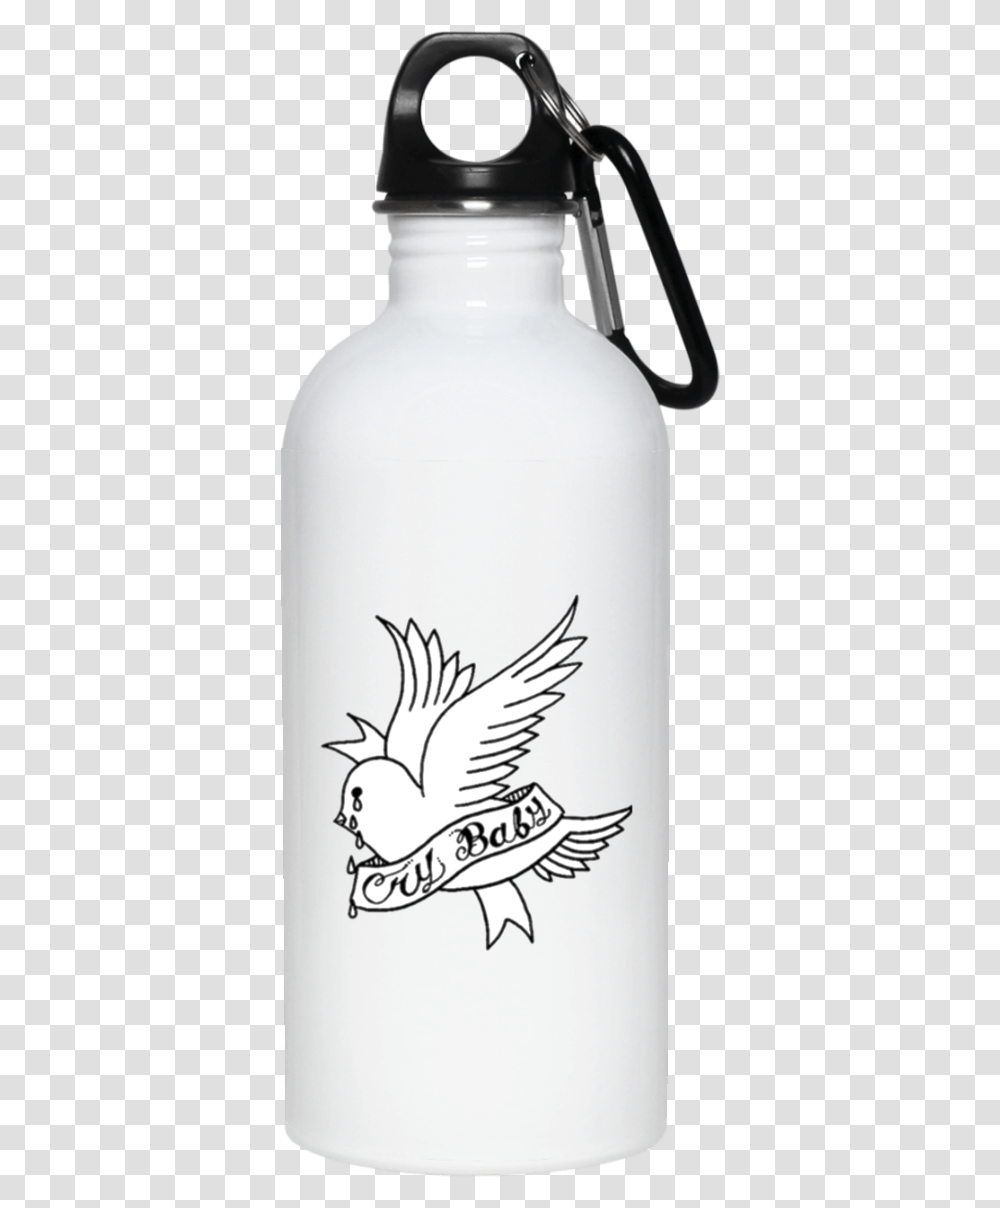 Lil Peep Crybaby 23663 20 Oz Stainless Steel Water Bottle Friends Tv Show Water Bottle, Bird, Animal, Beverage, Drink Transparent Png